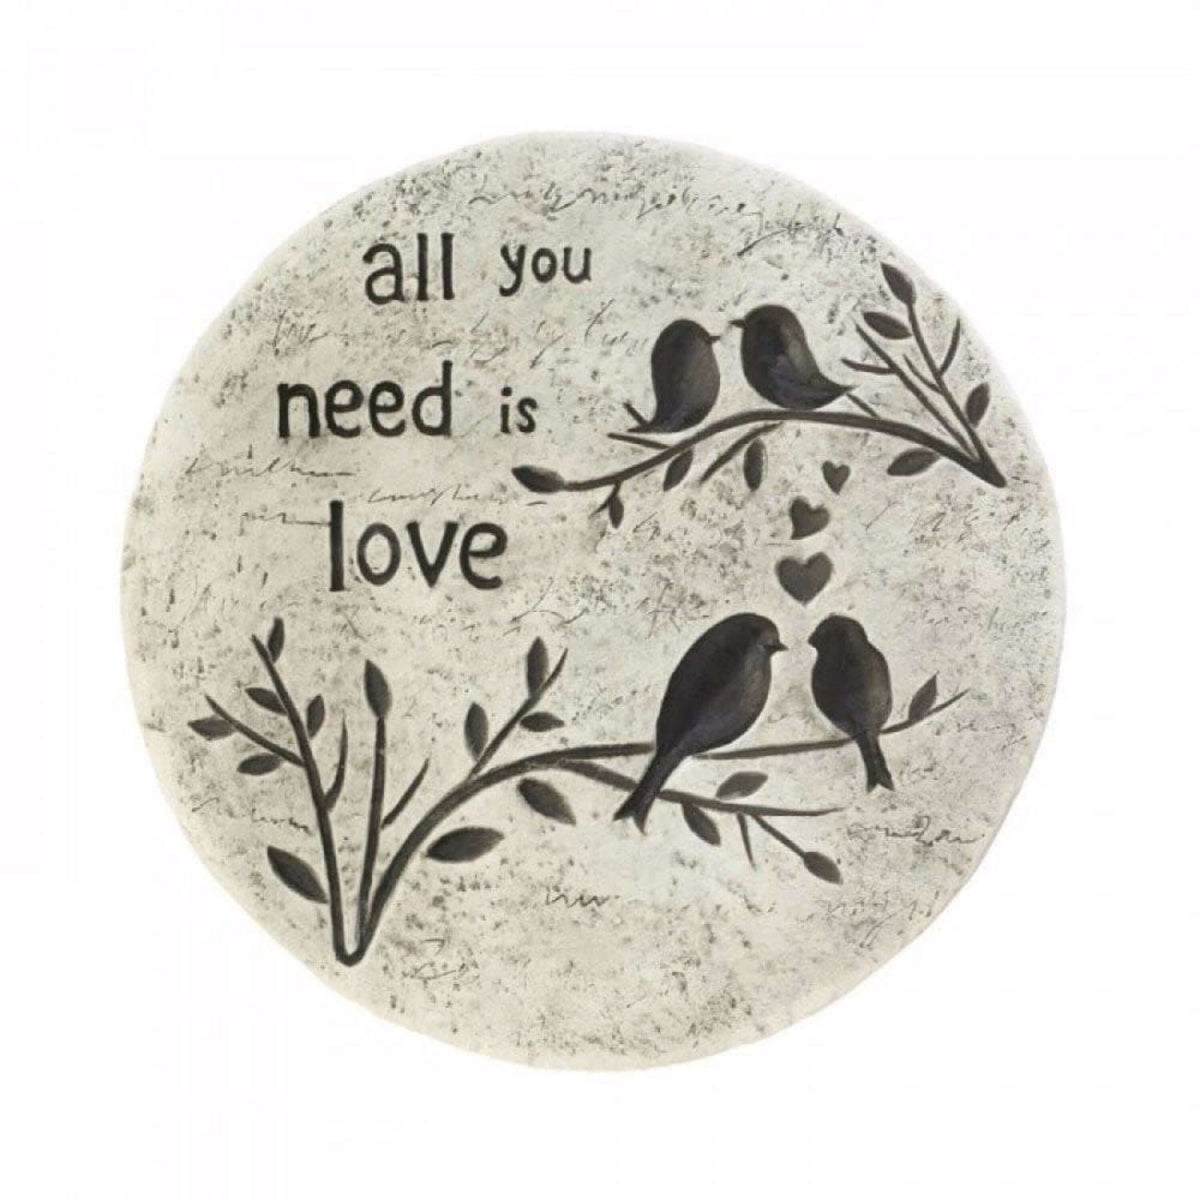 All You Need Is Love Stepping Stone - The House of Awareness